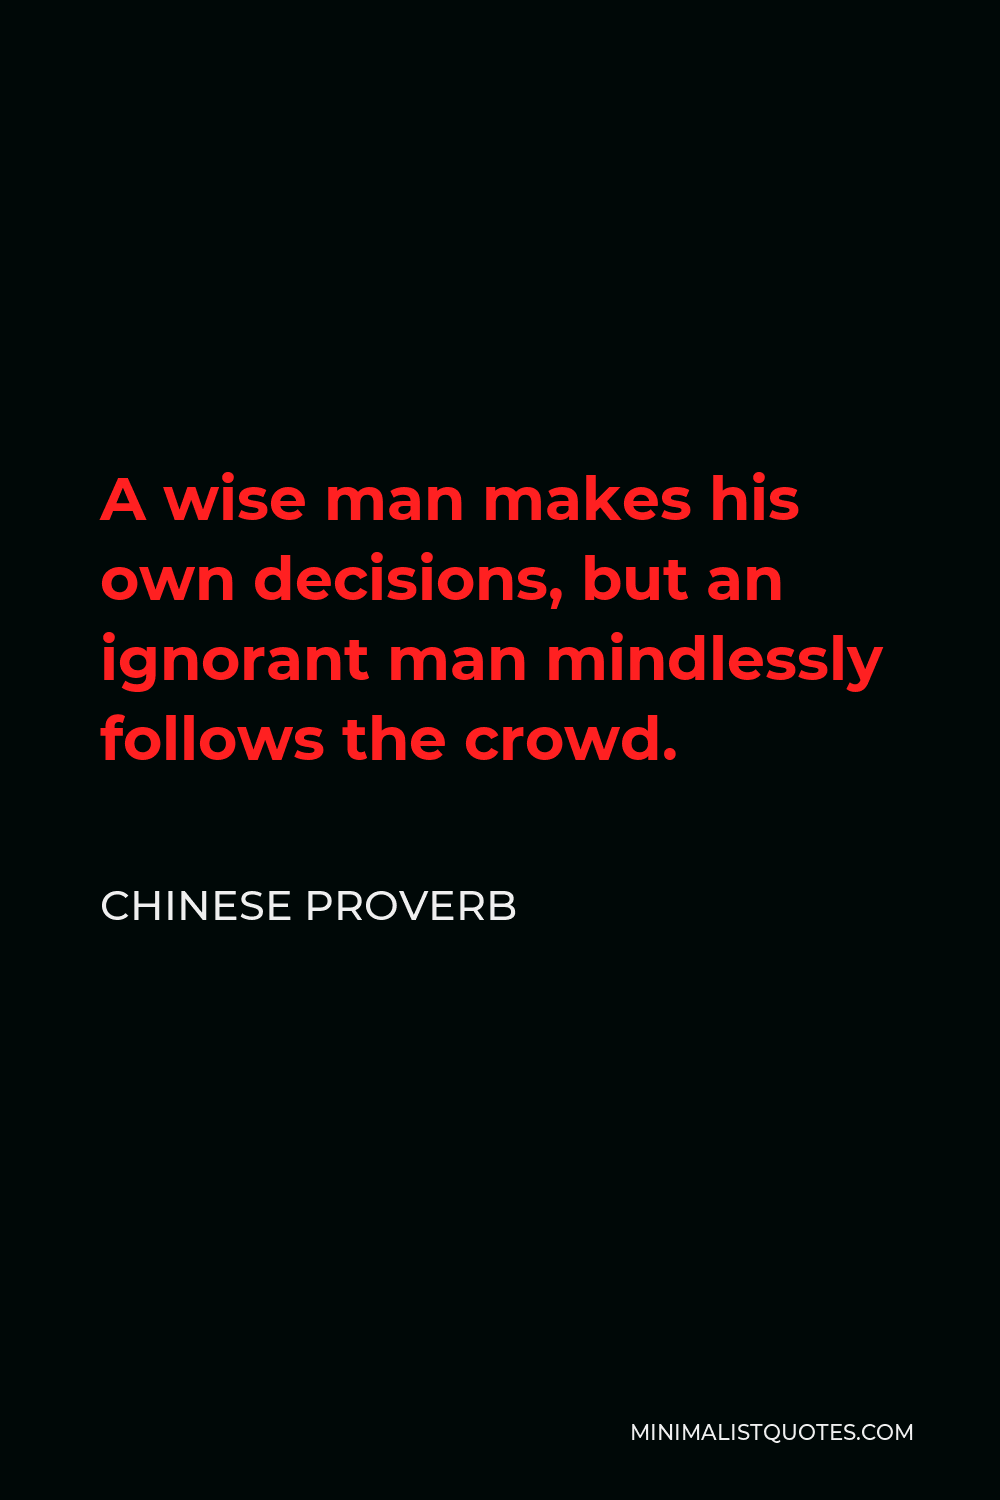 Chinese Proverb Quote - A wise man makes his own decisions, but an ignorant man mindlessly follows the crowd.